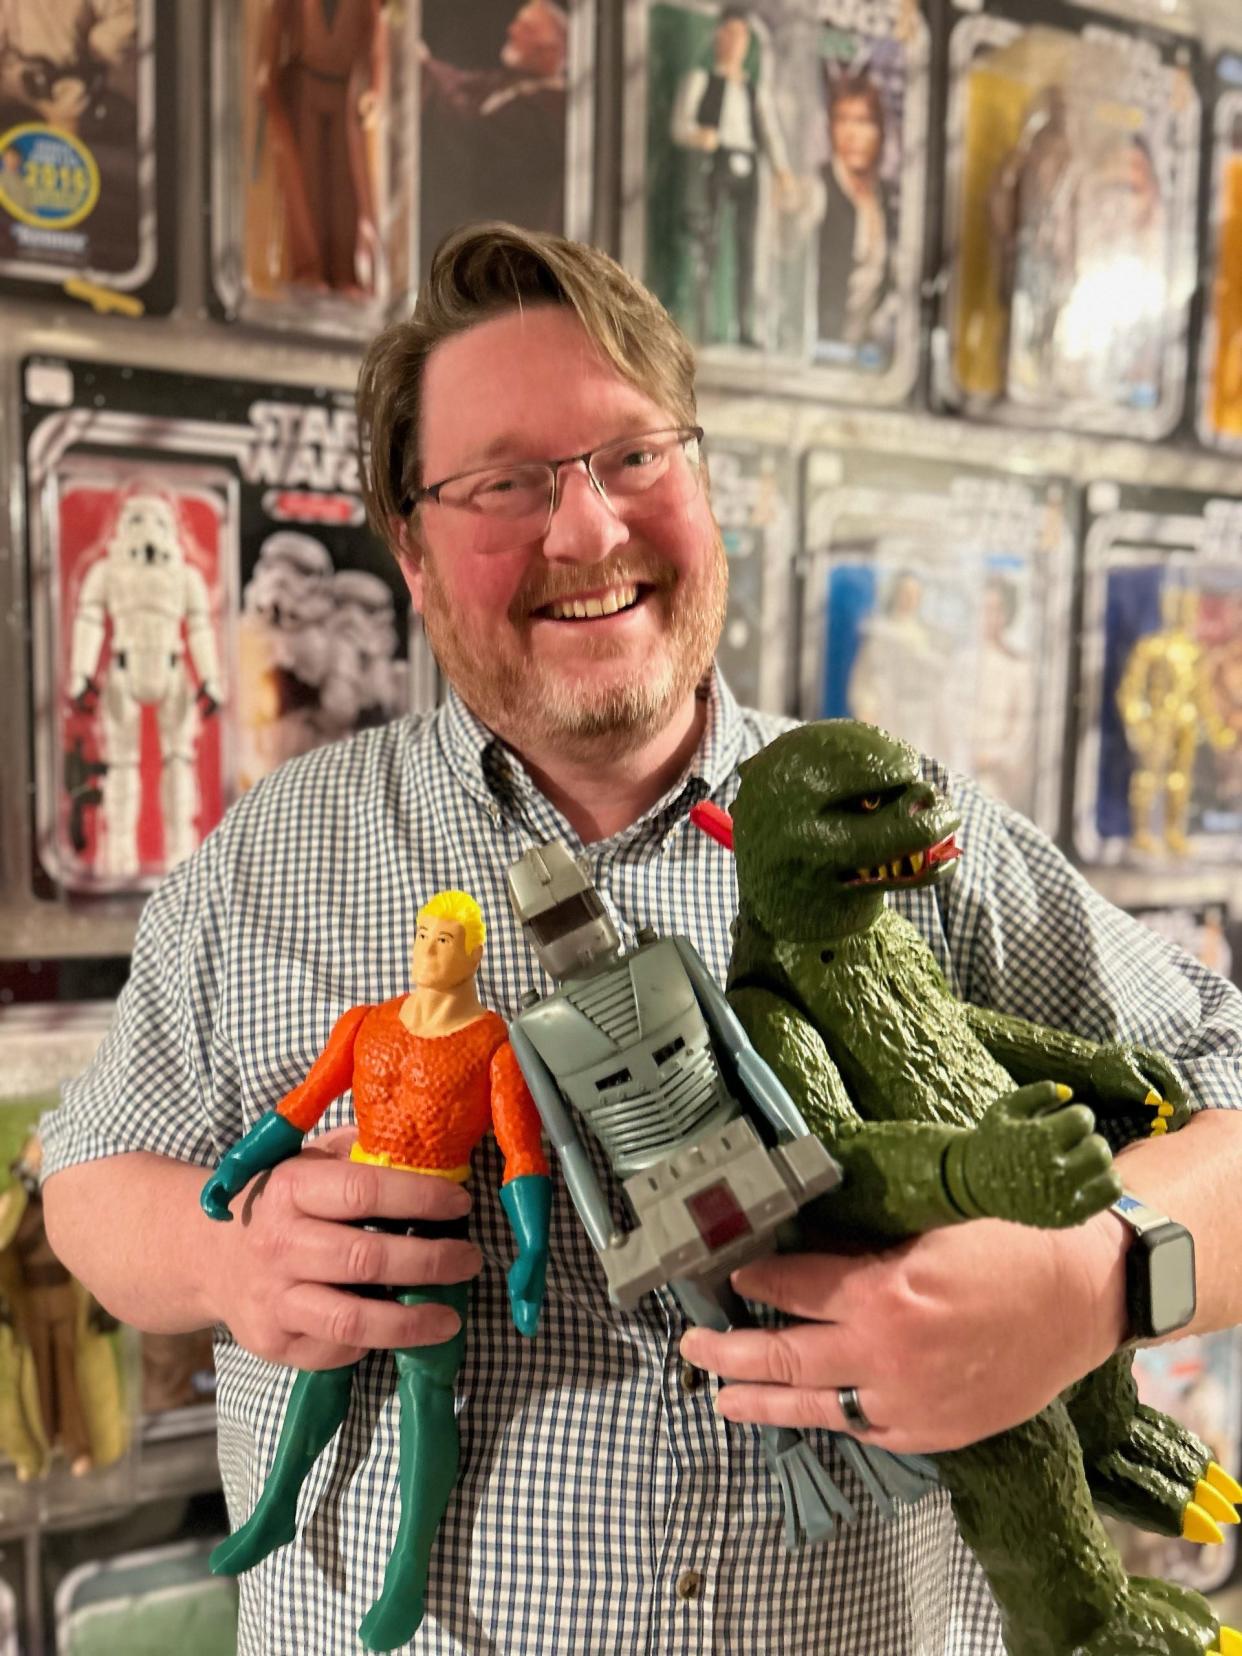 Norwalk resident Daniel Pickett is a toy and action figure expert. He appears on the third season of "The Toys That Built America" on the History Channel. Here he holds Aquaman, Rom the Space Knight, and Godzilla.